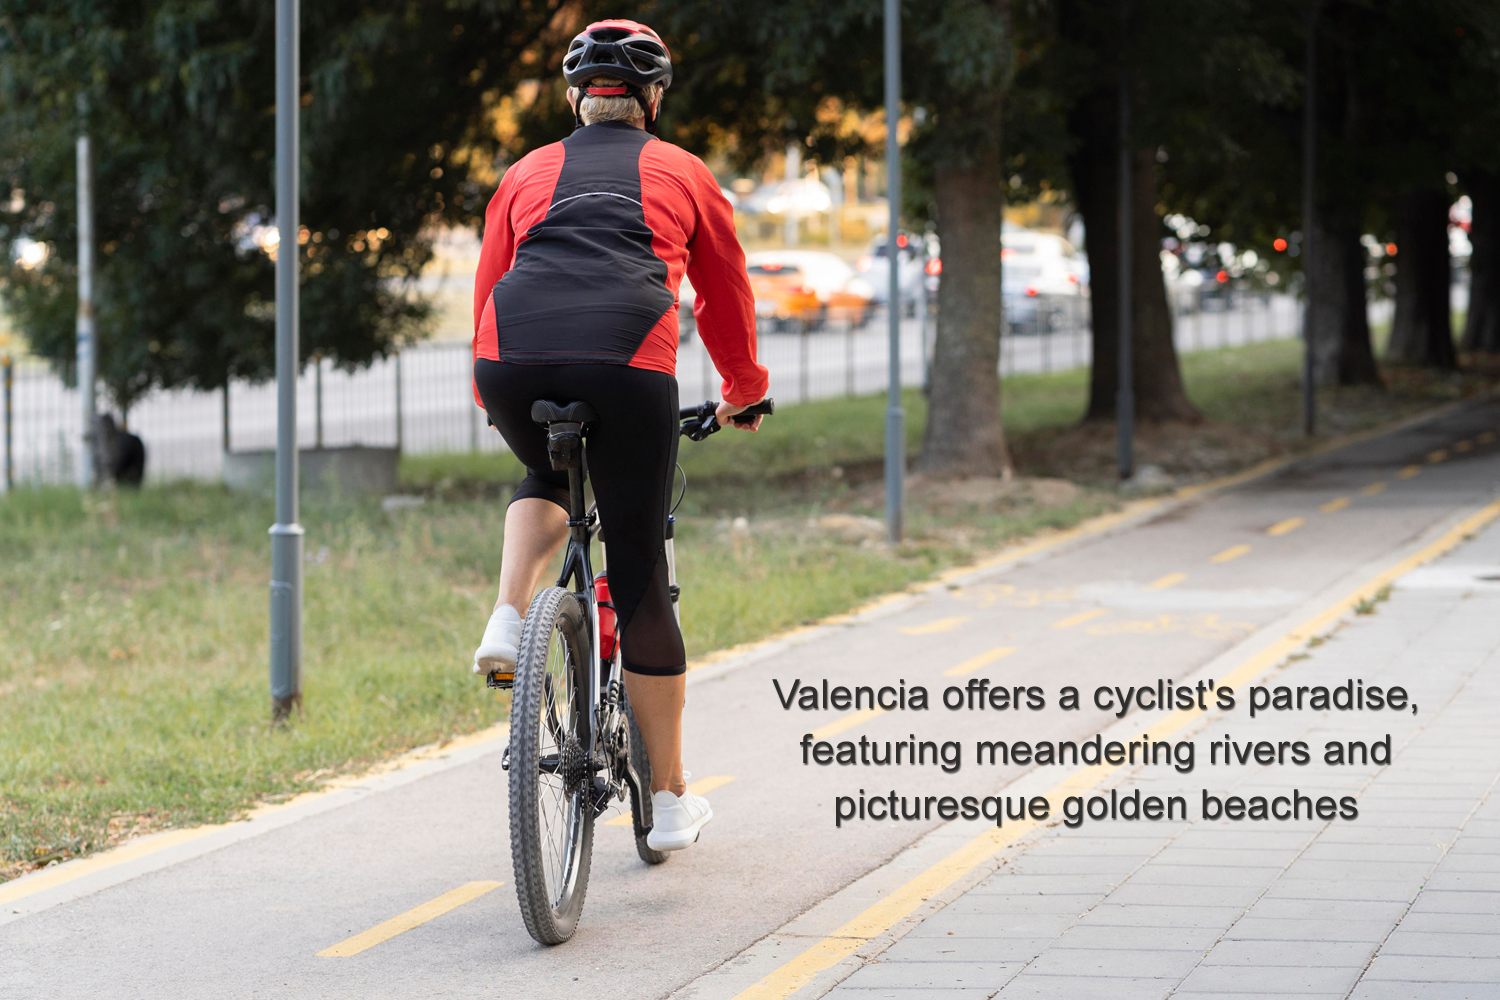 Valencia offers a cyclist's paradise, featuring meandering rivers and picturesque golden beaches